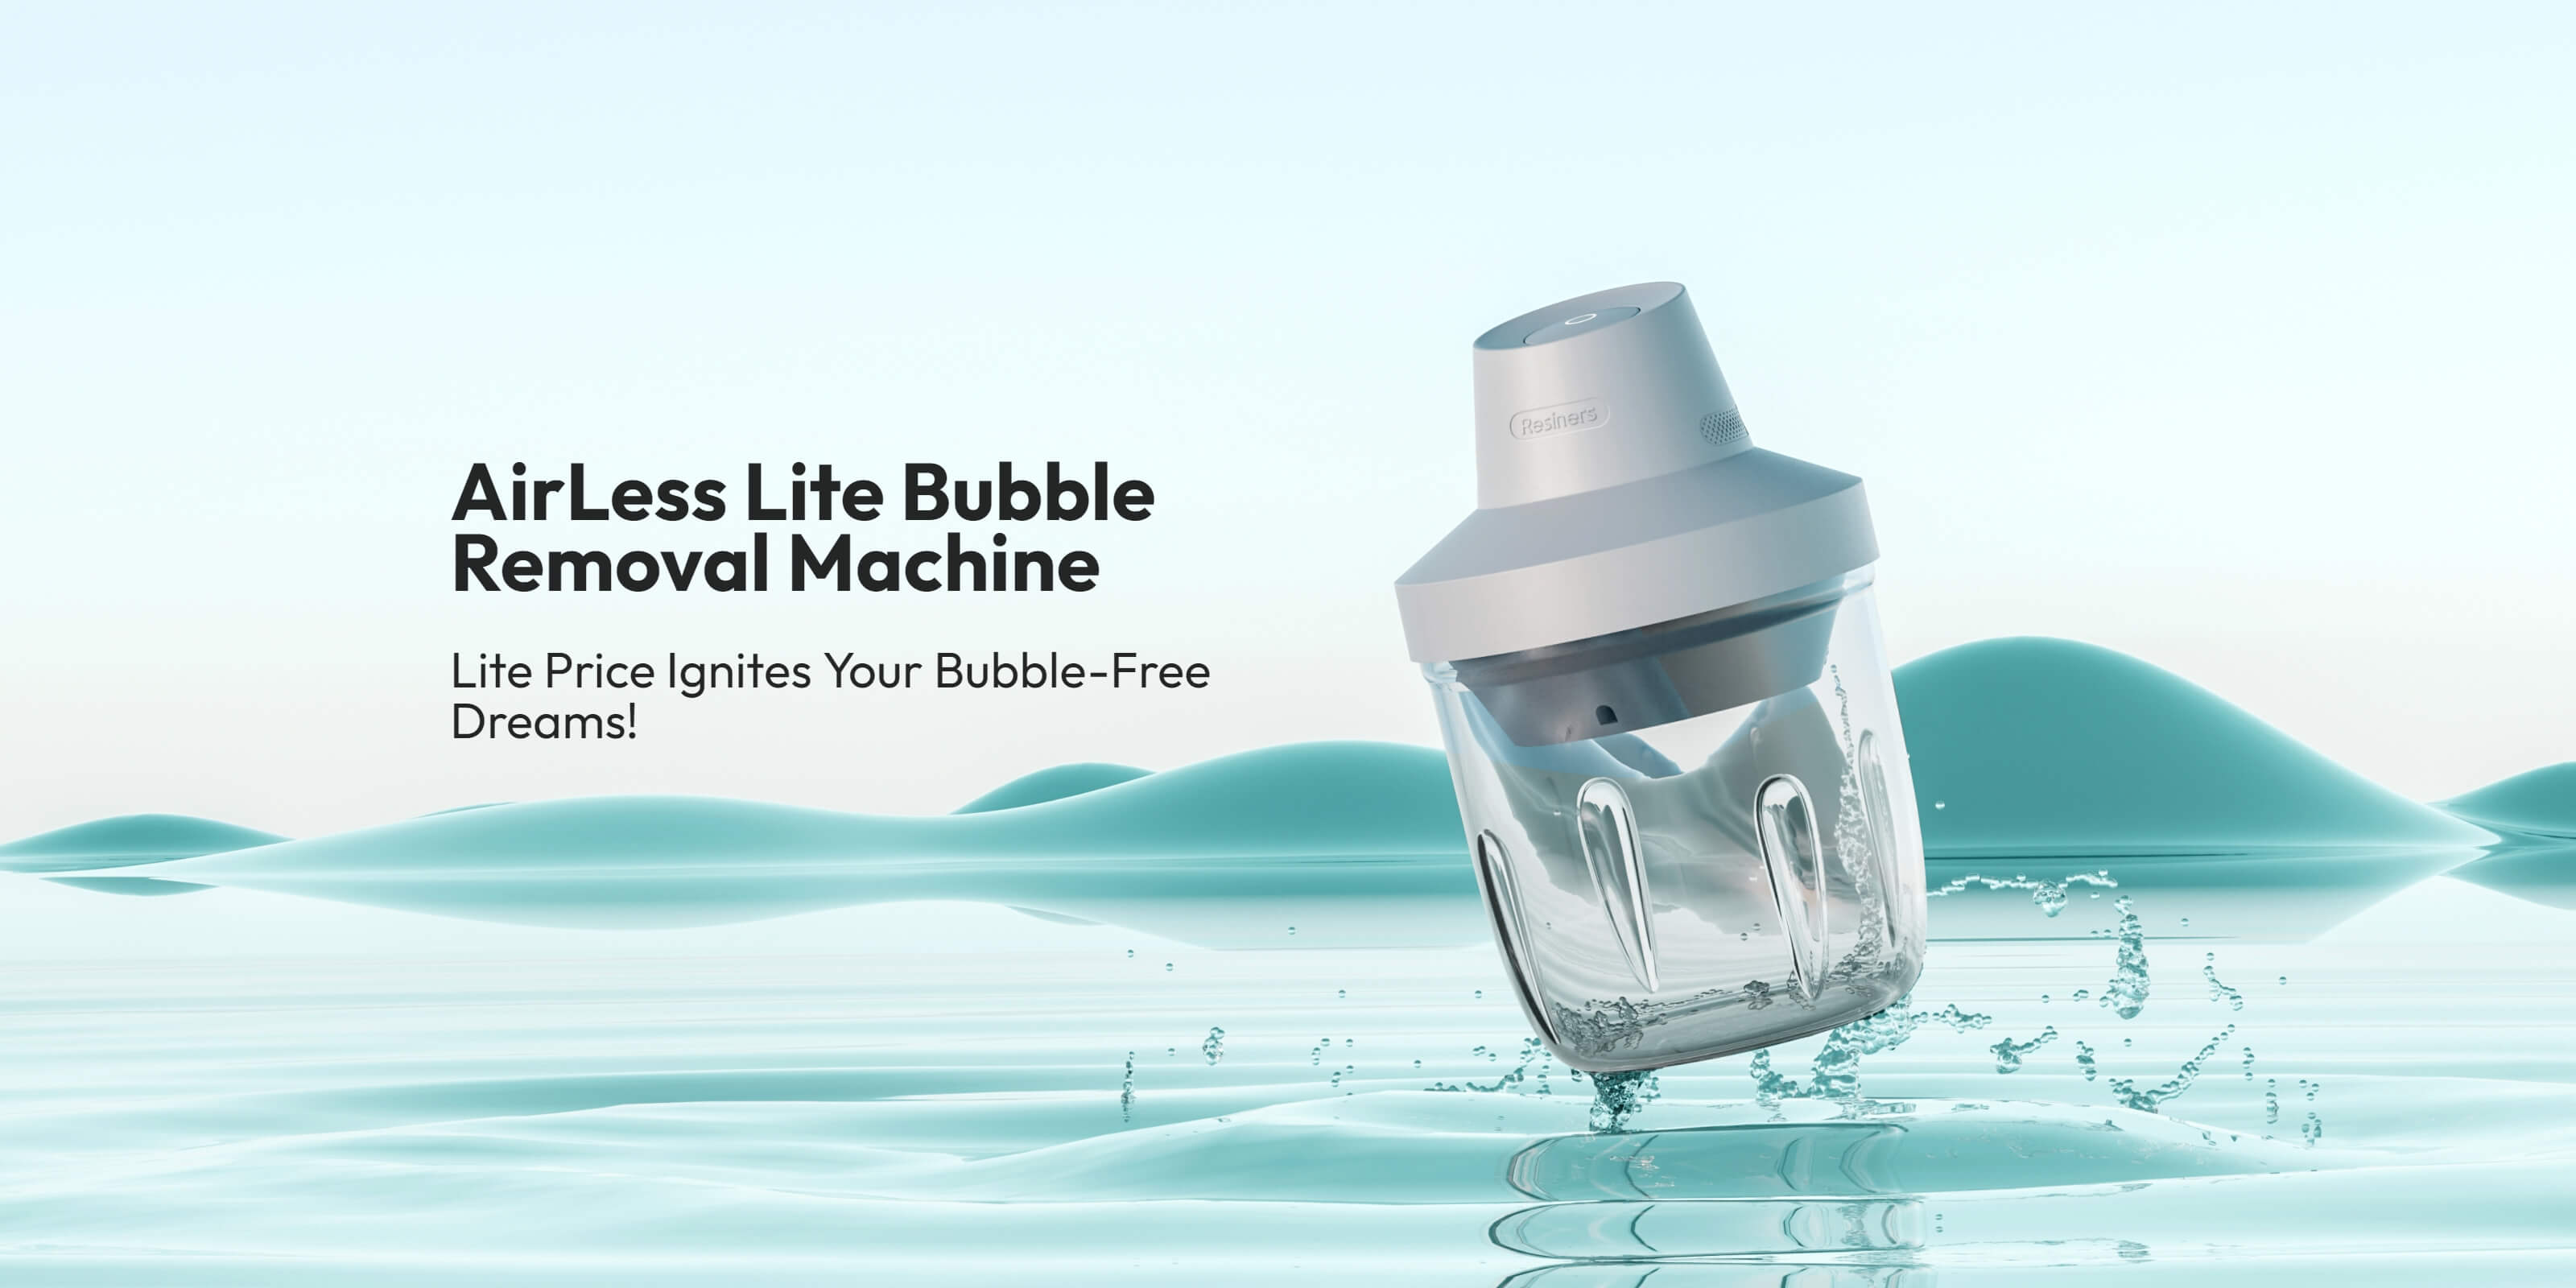 Is It Really Necessary to Use an AirLess Bubble Removal Machine?